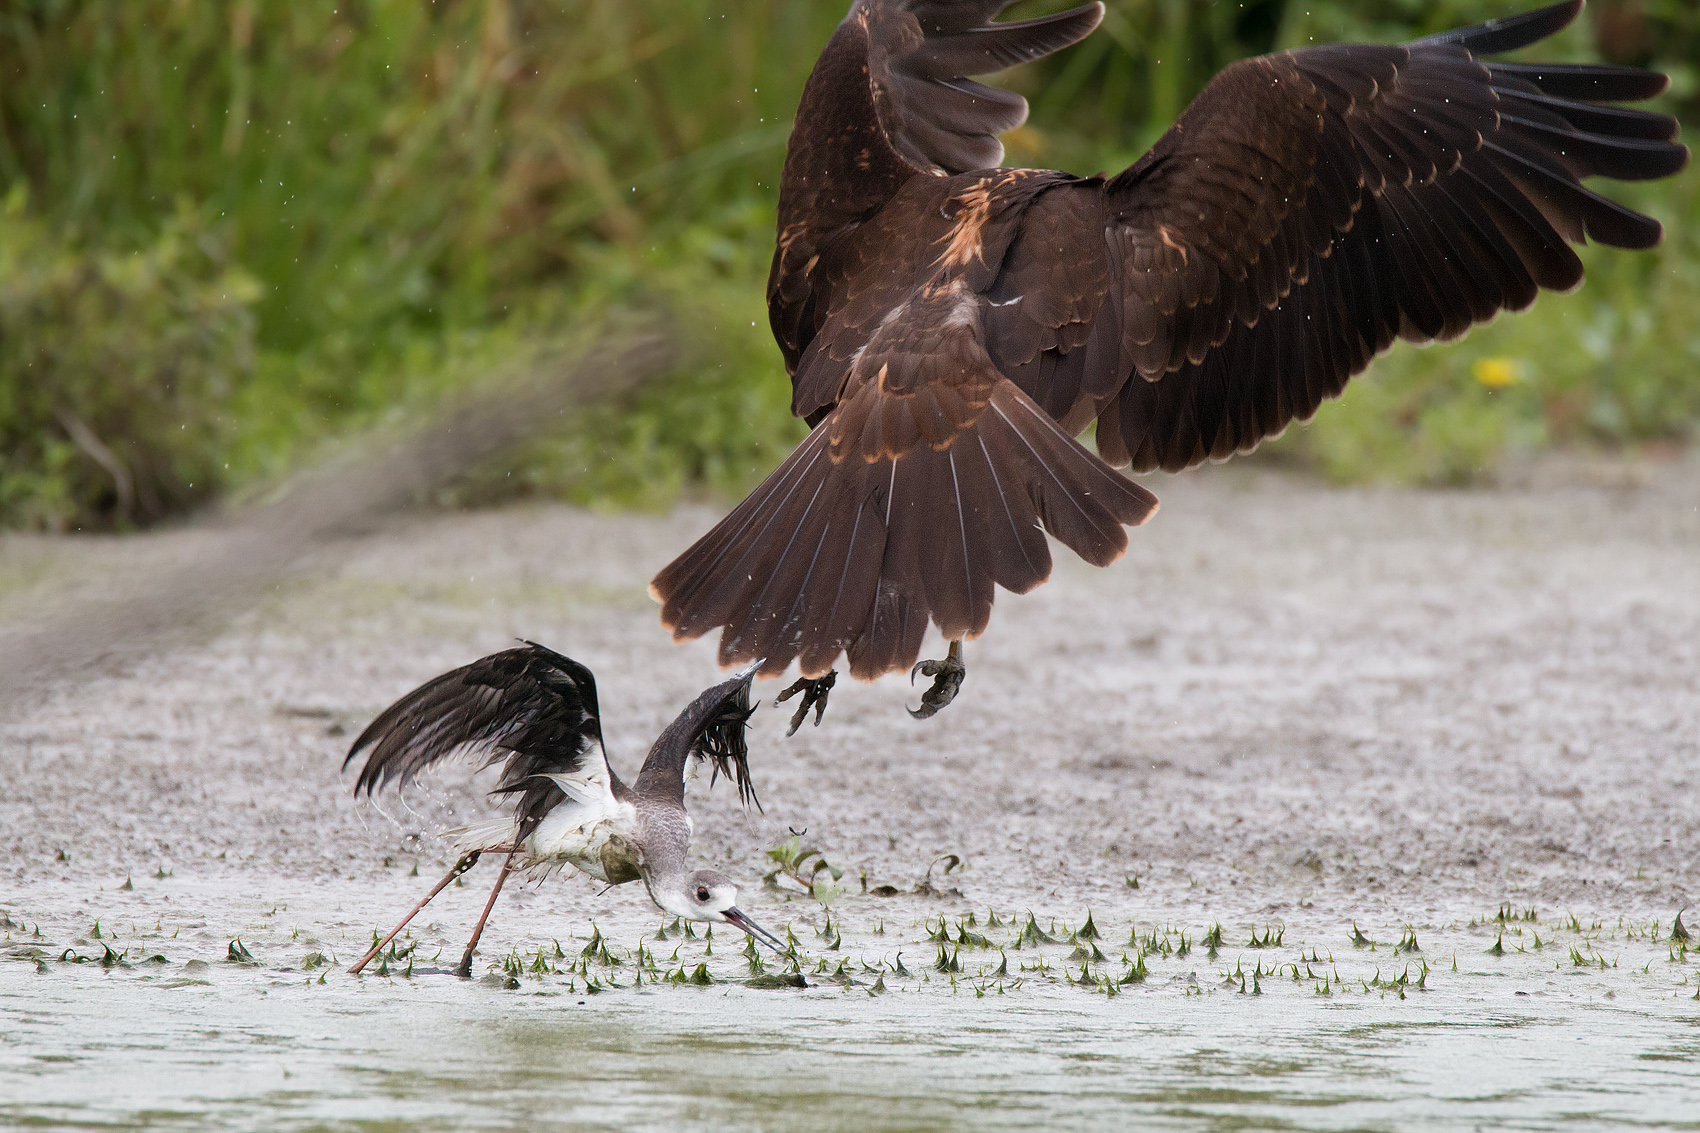 The attack of the Marsh Harrier to the young knight...